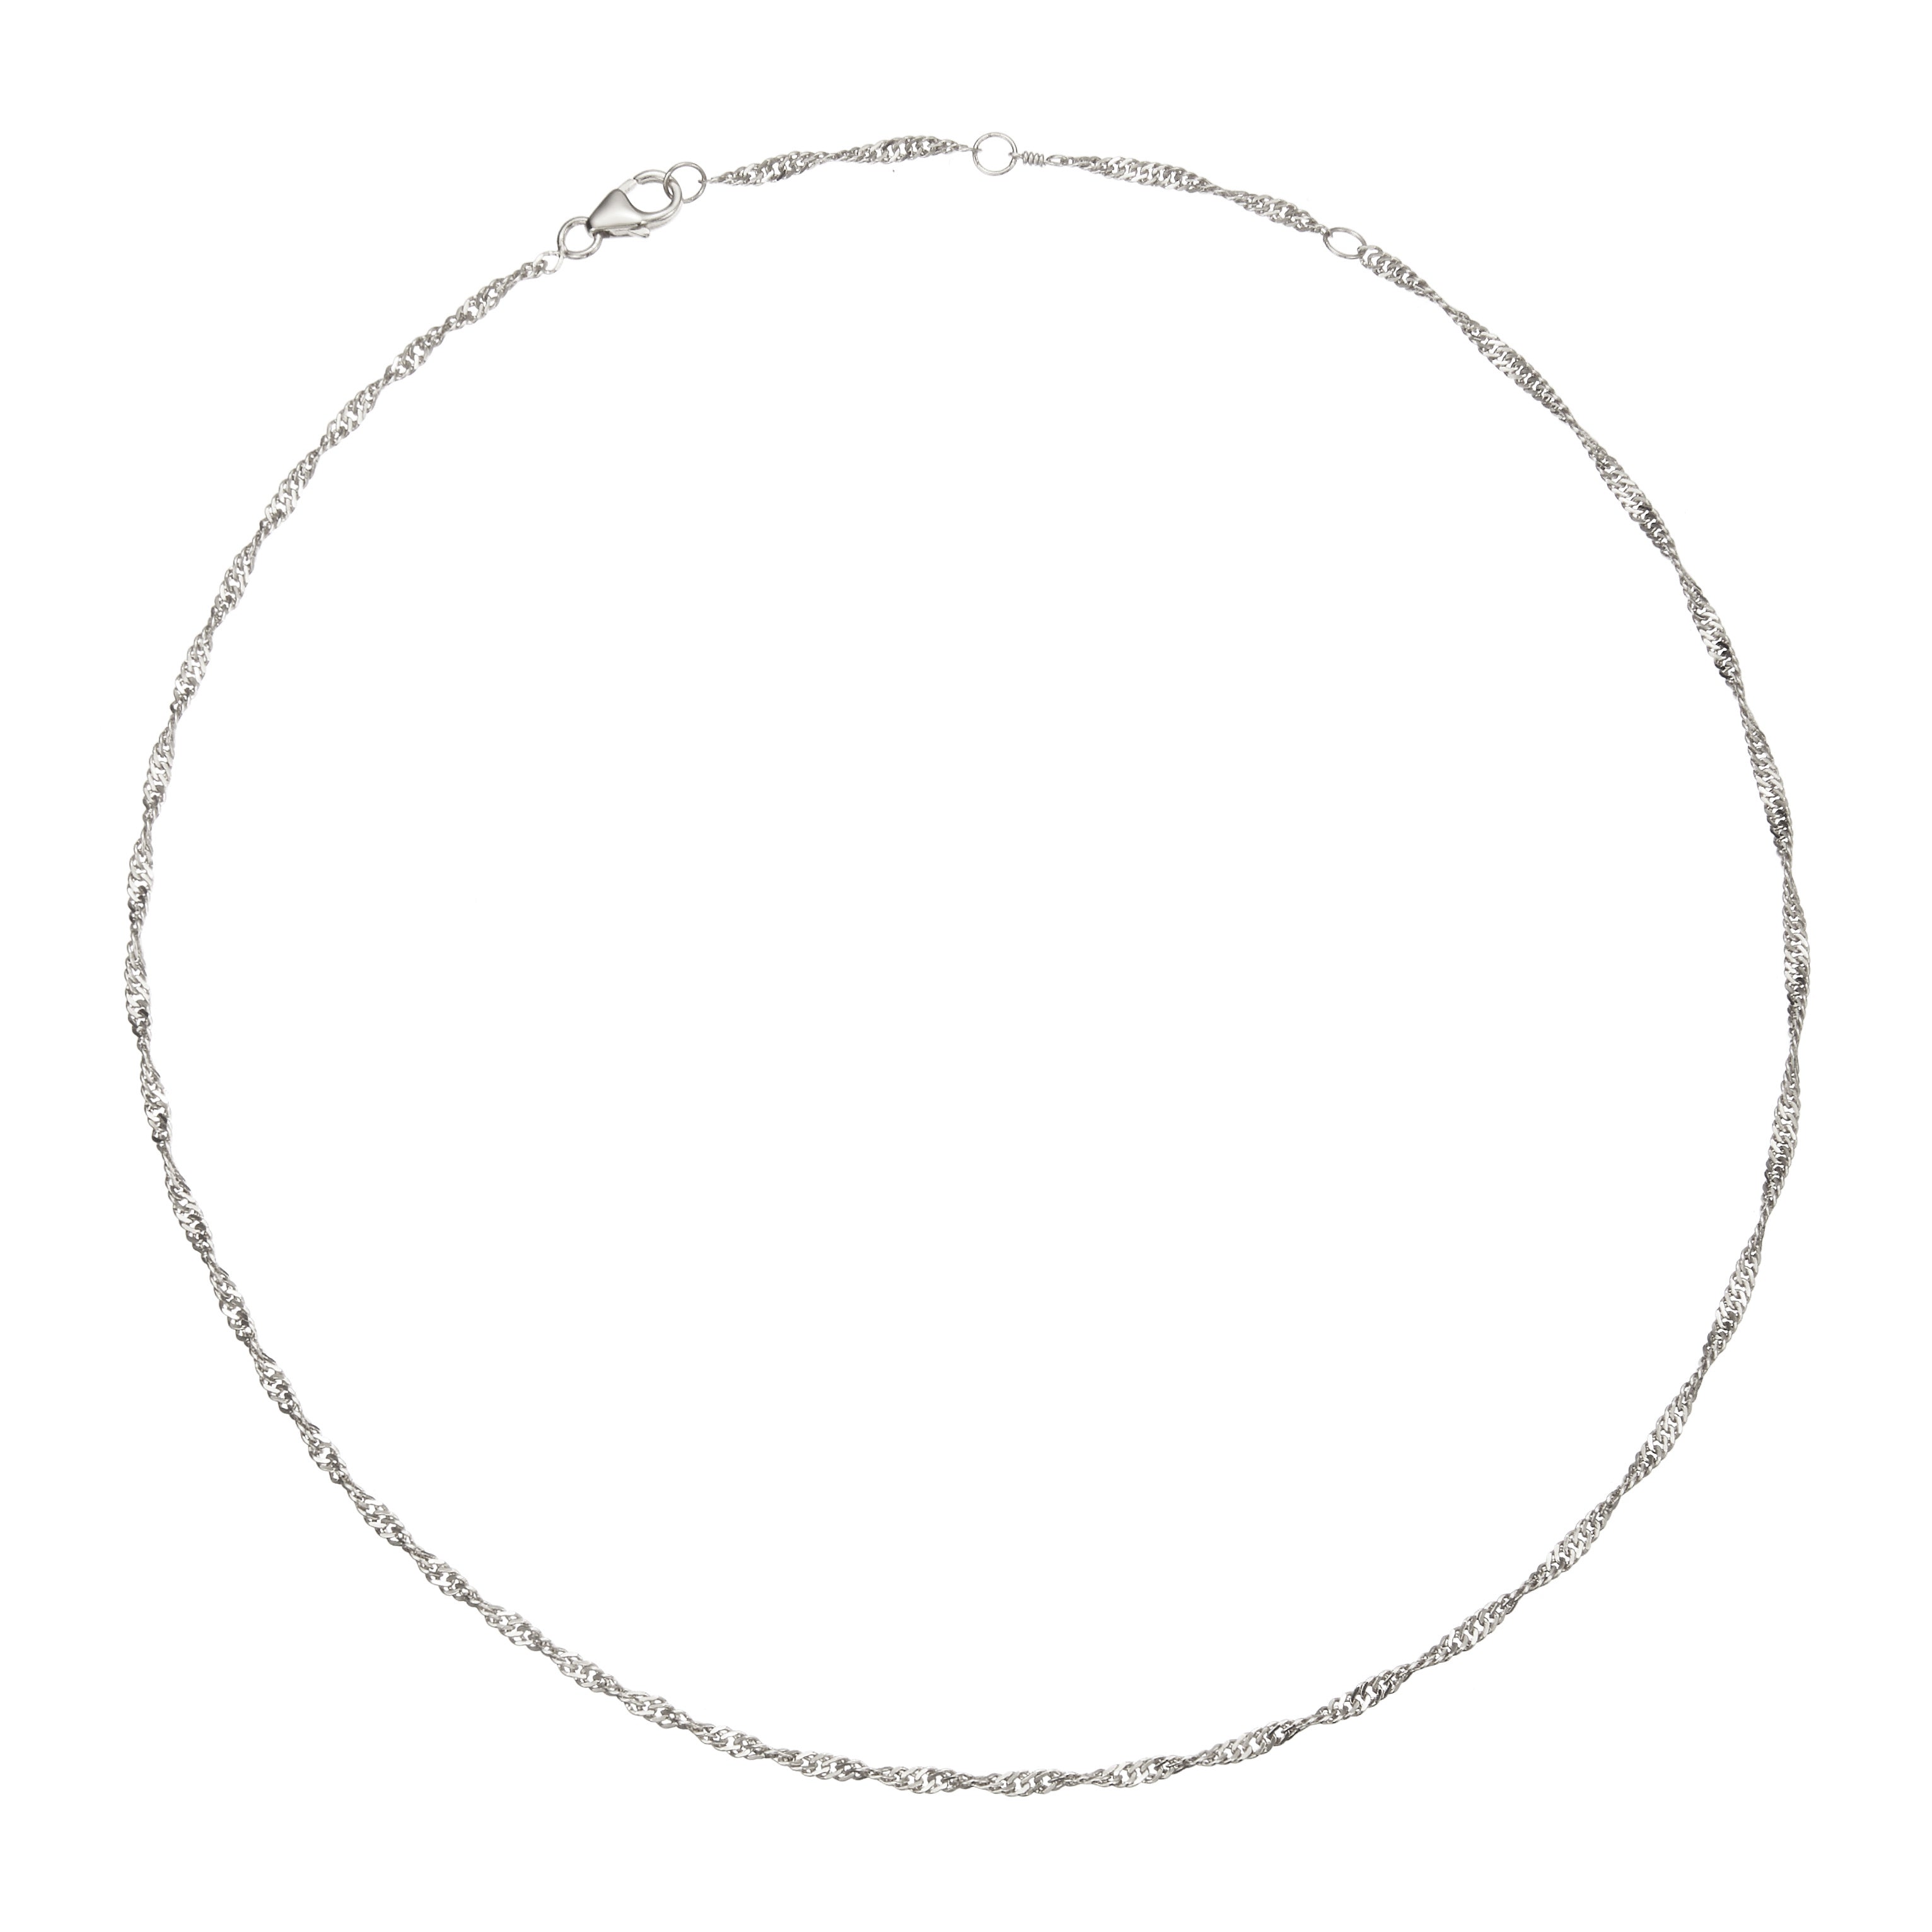 Silver twisted rope chain necklace on a white background